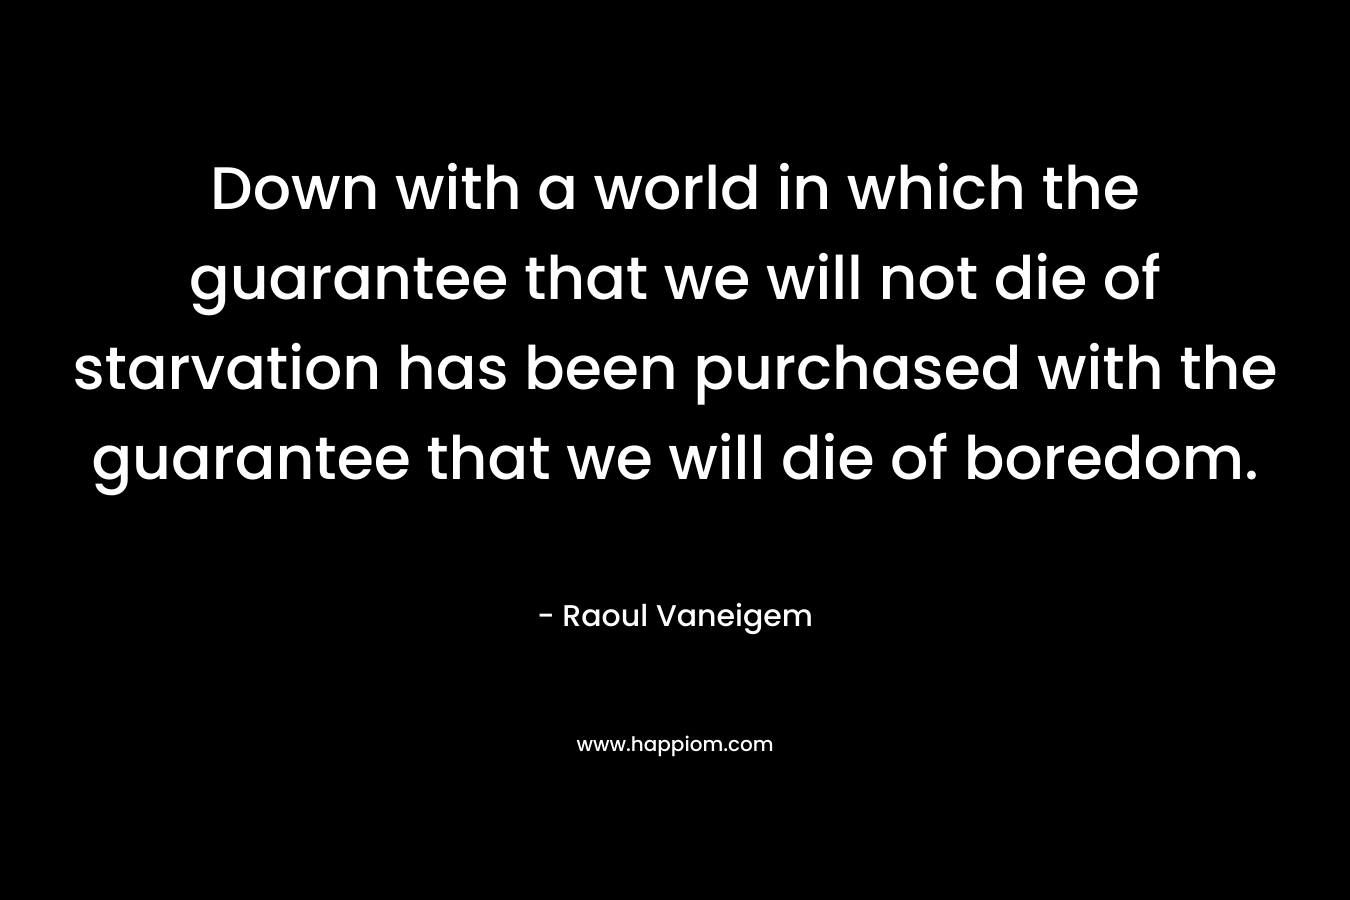 Down with a world in which the guarantee that we will not die of starvation has been purchased with the guarantee that we will die of boredom. – Raoul Vaneigem